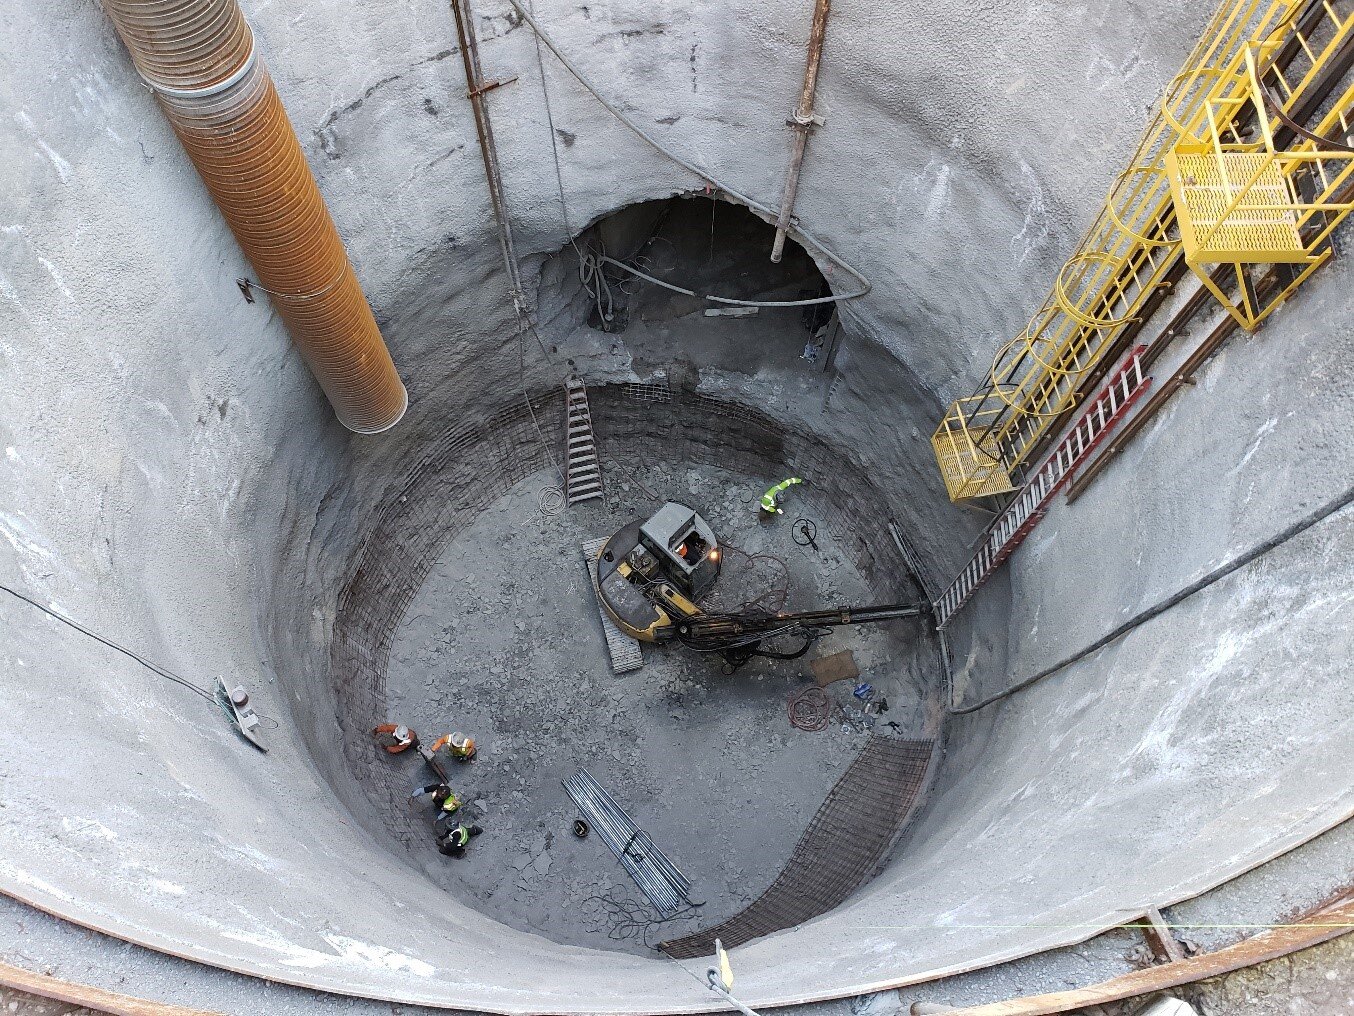 Shaft F - Initial Support Installation